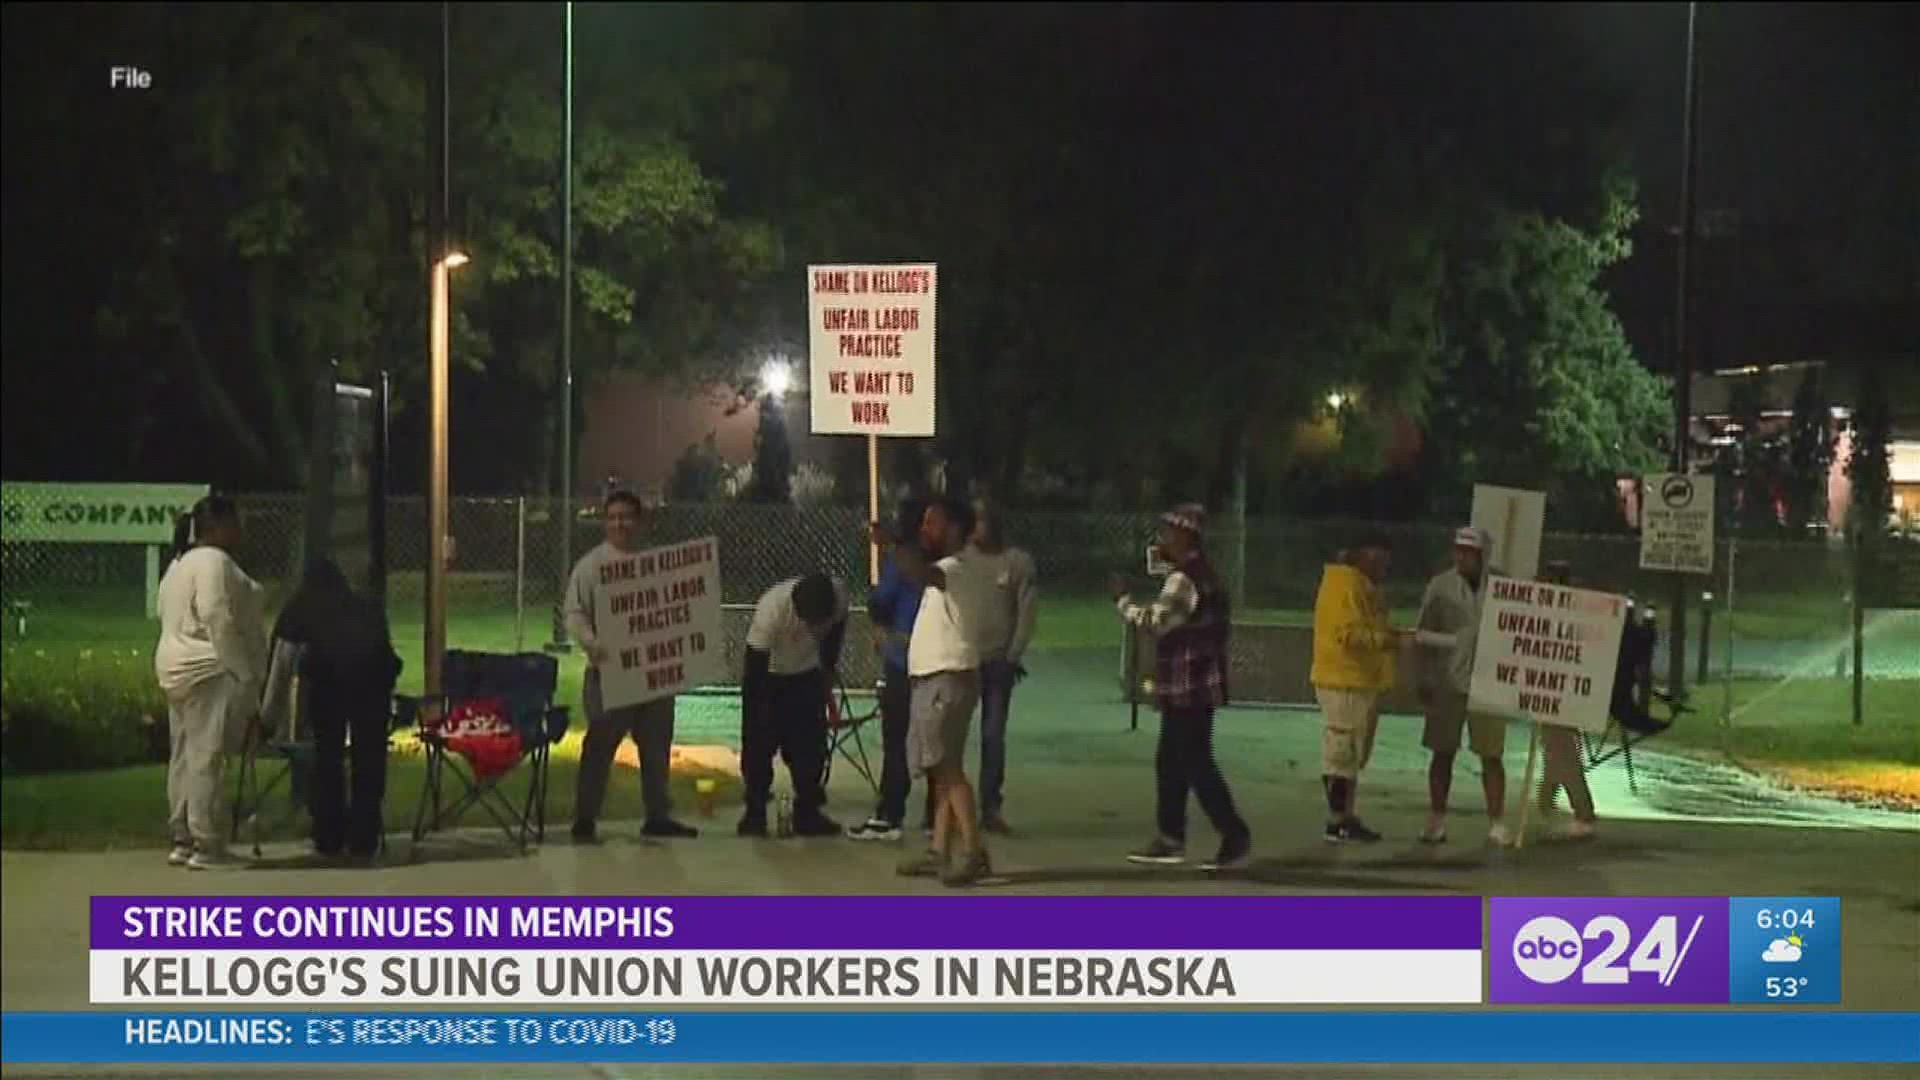 The Kellogg Co. has filed a lawsuit against its local union in Omaha complaining that striking workers are blocking entrances to its cereal plant.